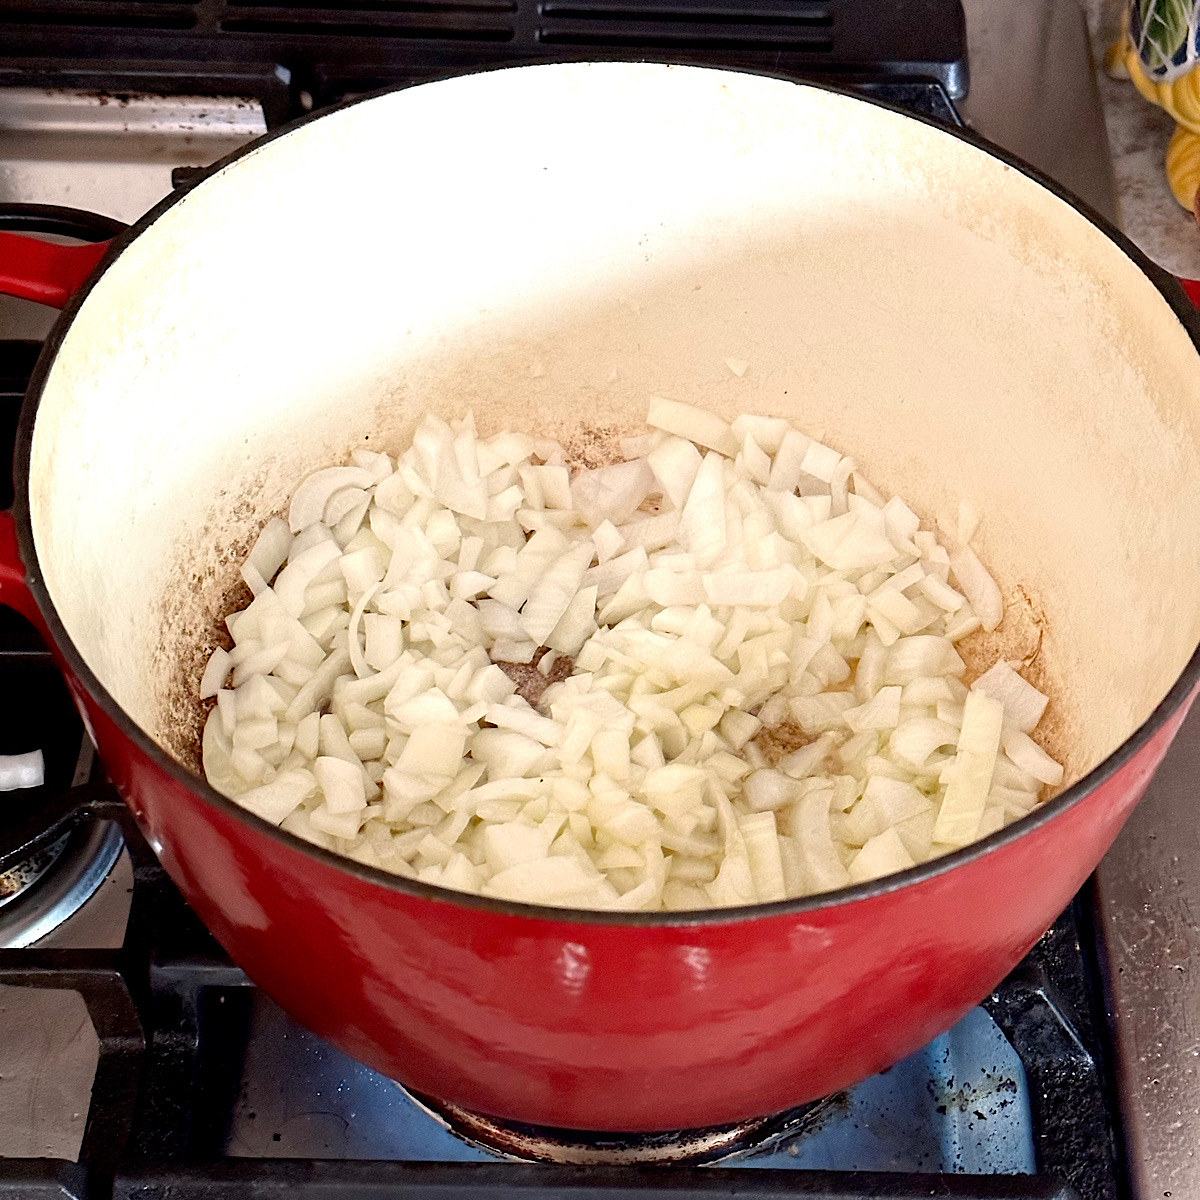 Chopped onions caramelizing in a large dutch oven.